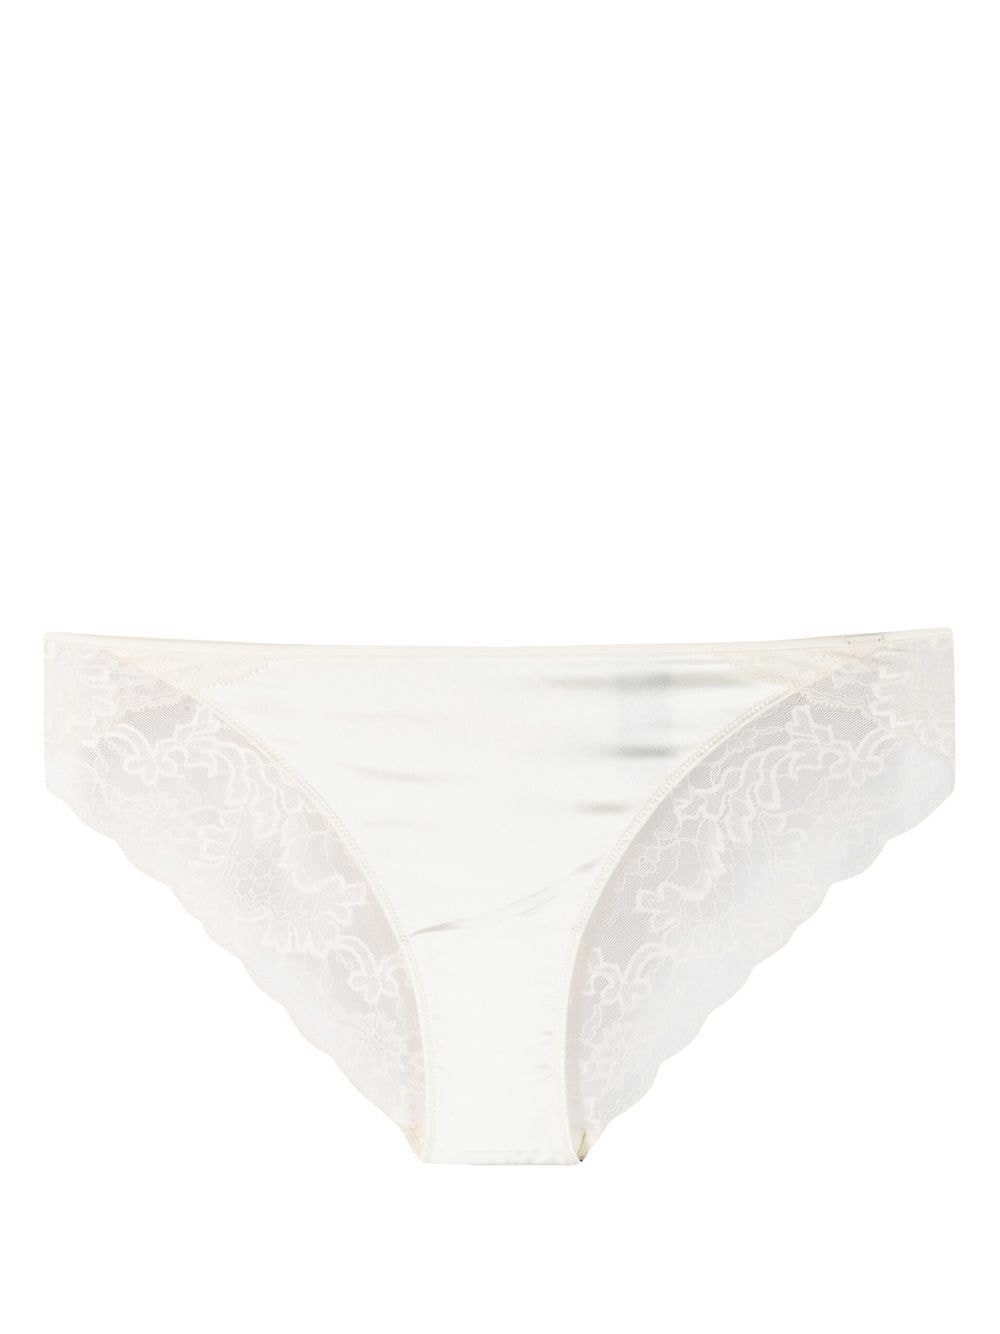 Hanro Moments floral-lace Thong - Farfetch